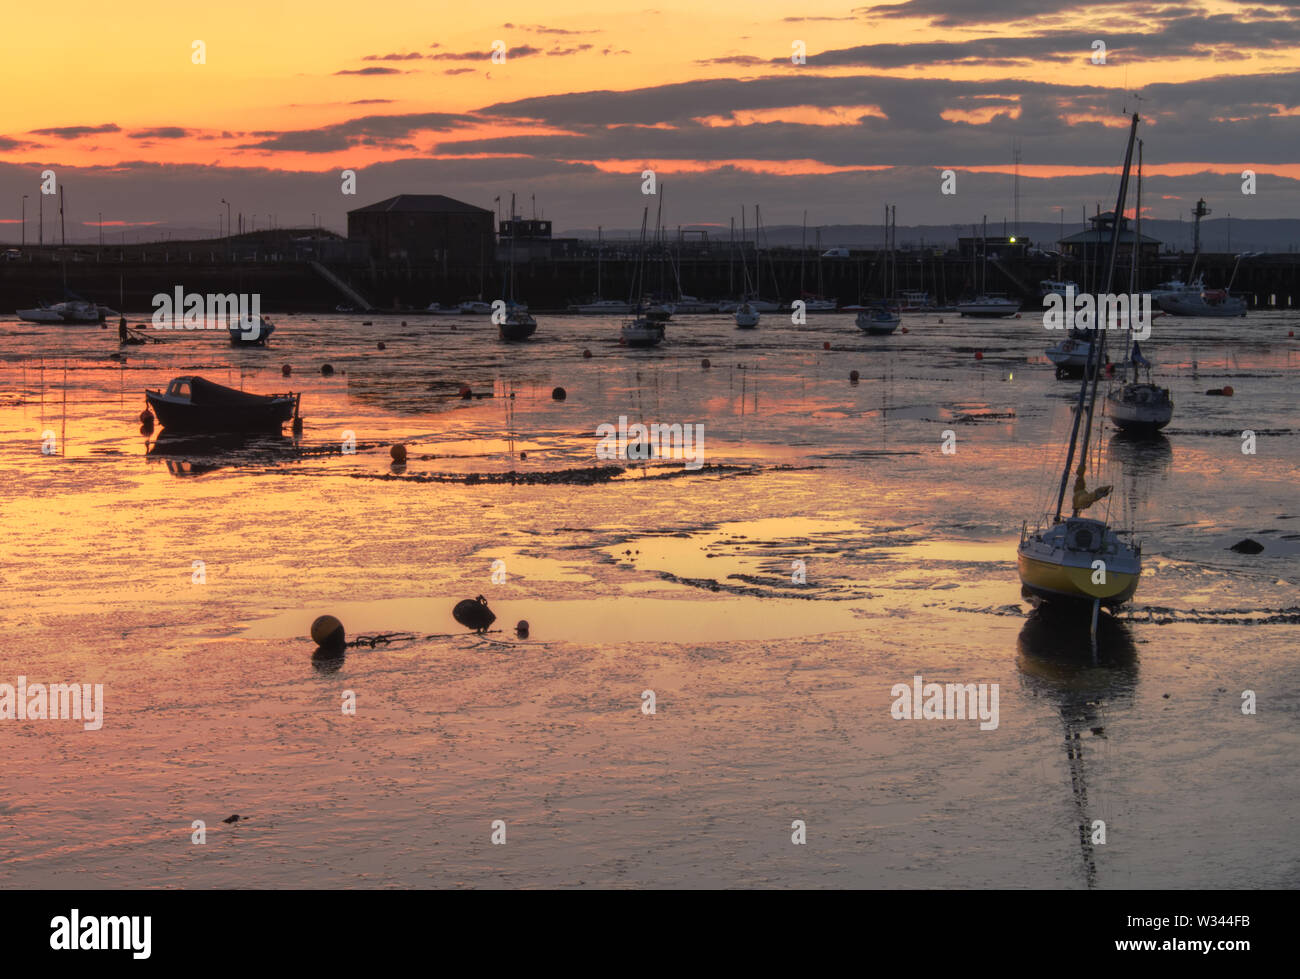 Edinburgh, Scotland / United Kingdom -May 11 2019: The harbour in Granton, Edinburgh, UK at low tide with a number of sailing boats resting on the ban Stock Photo